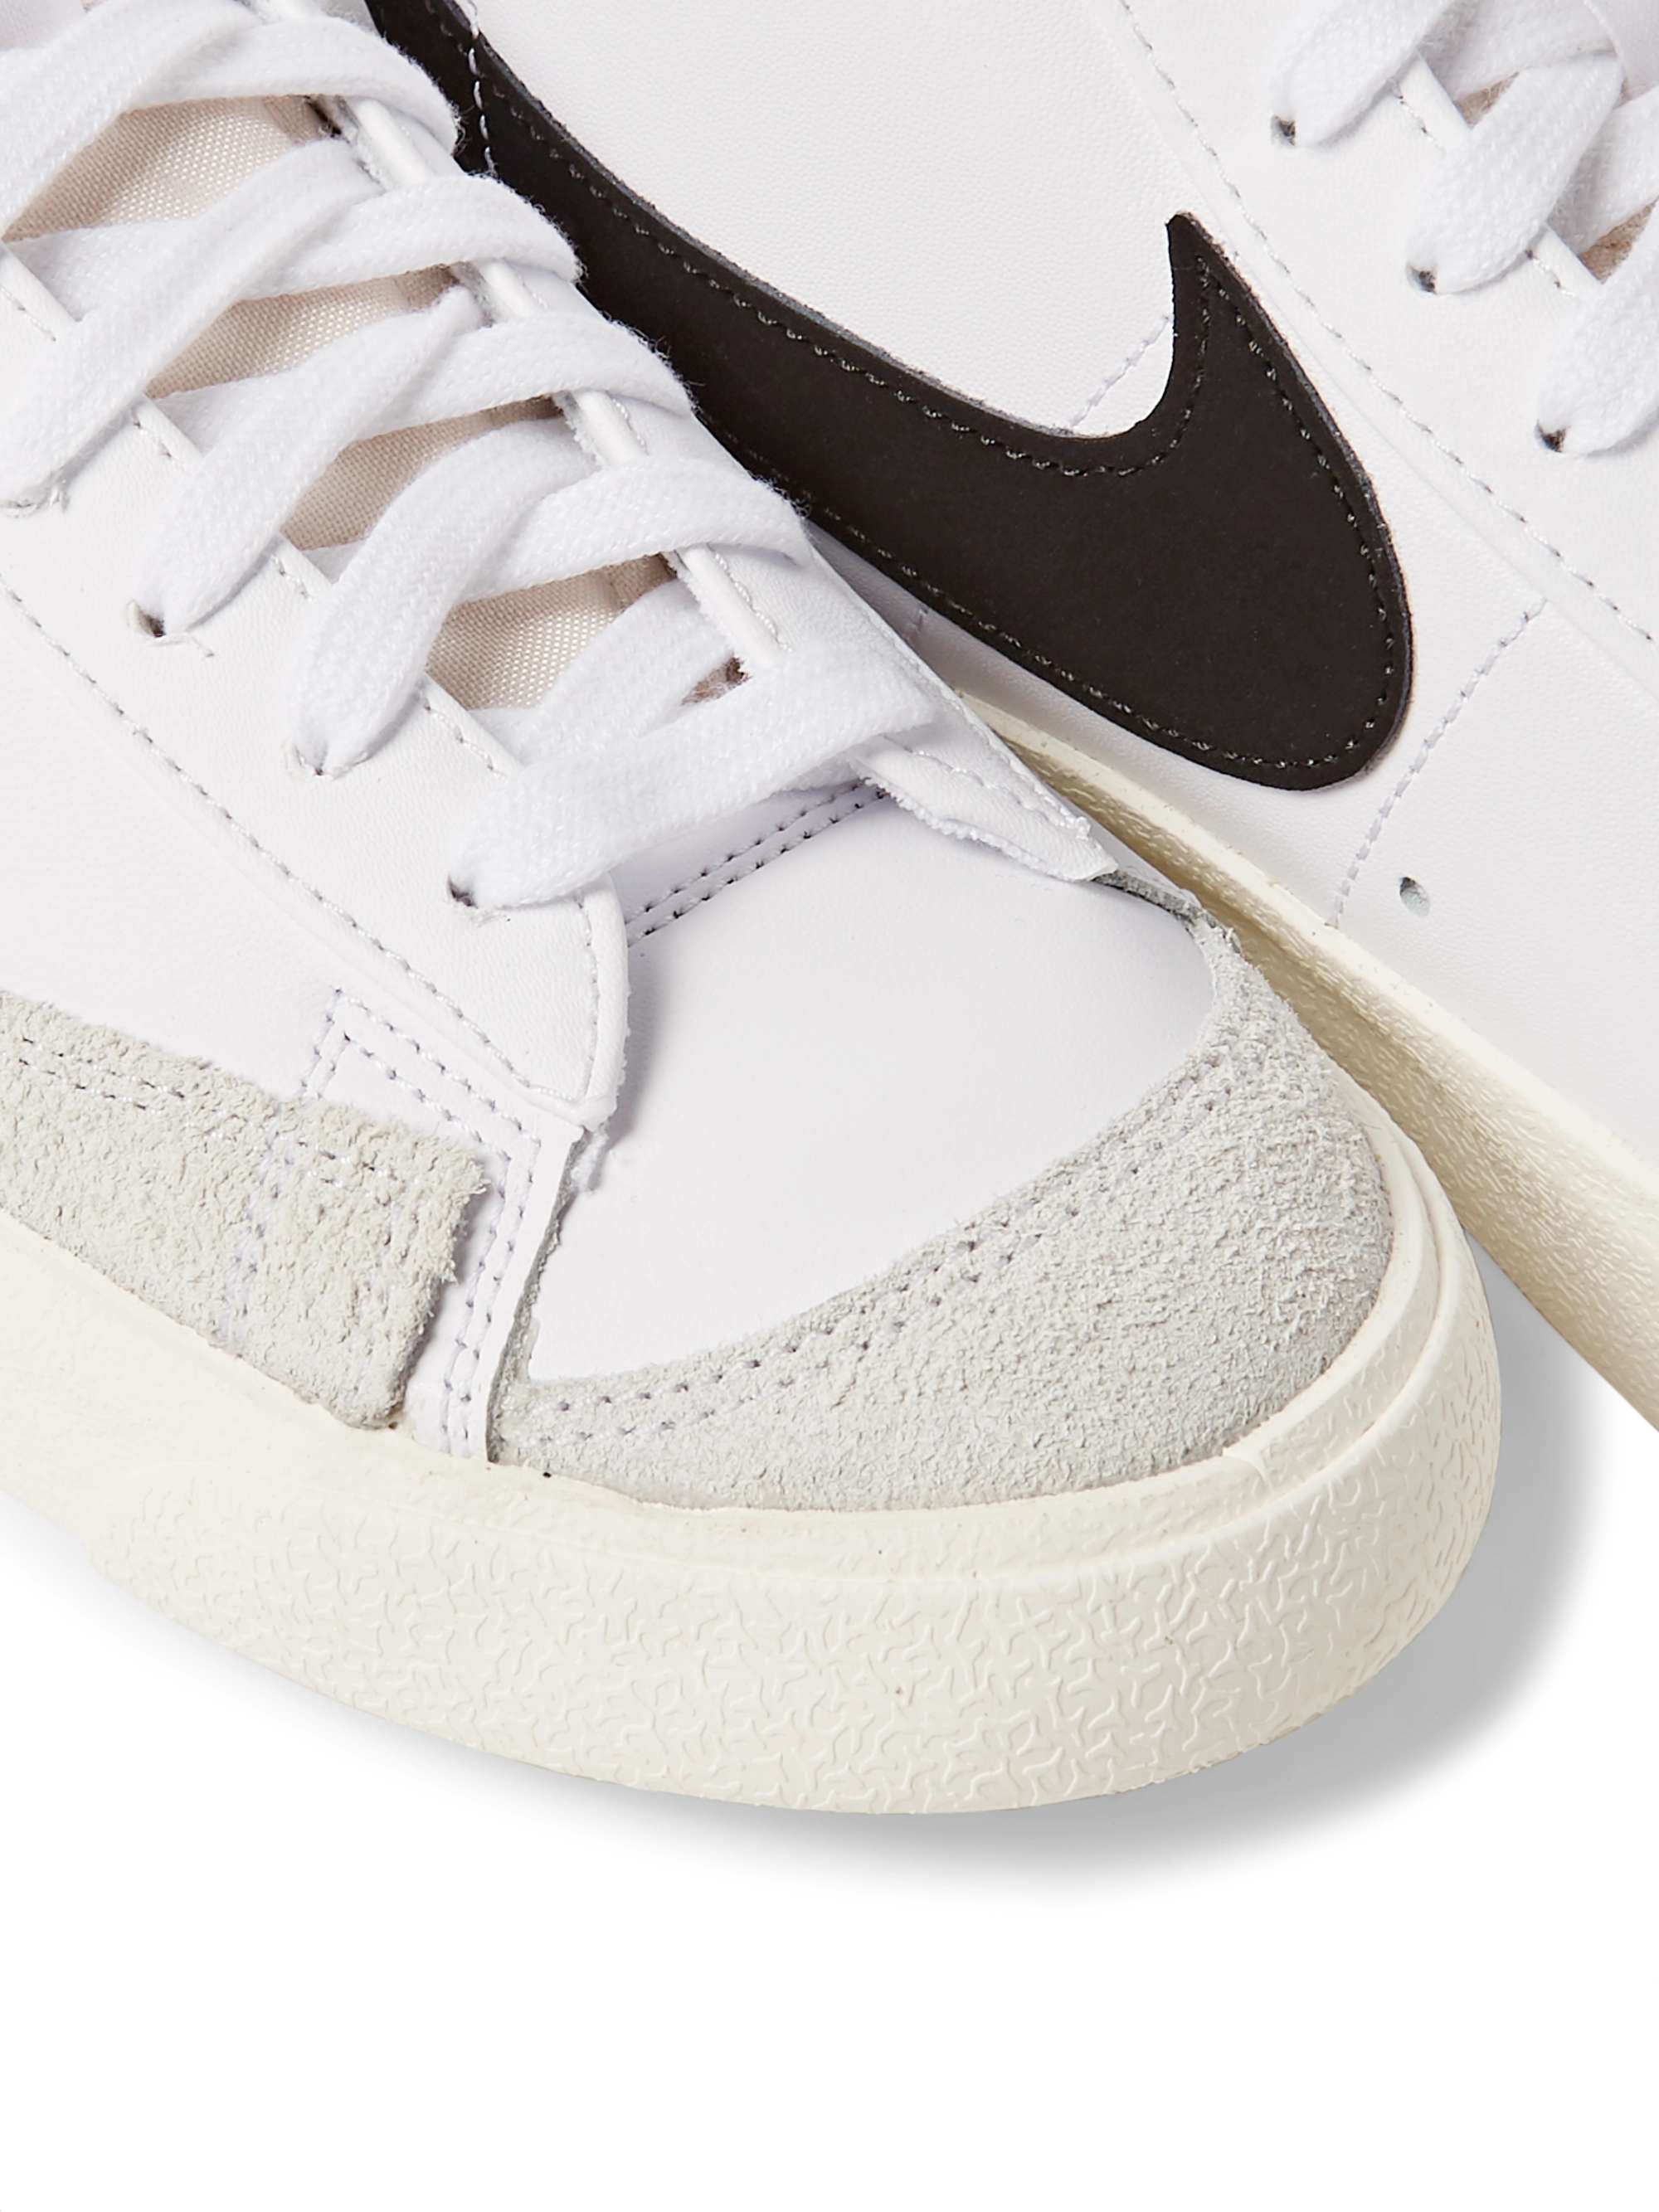 NIKE Blazer Mid '77 Suede-Trimmed Leather Sneakers for Men | MR PORTER